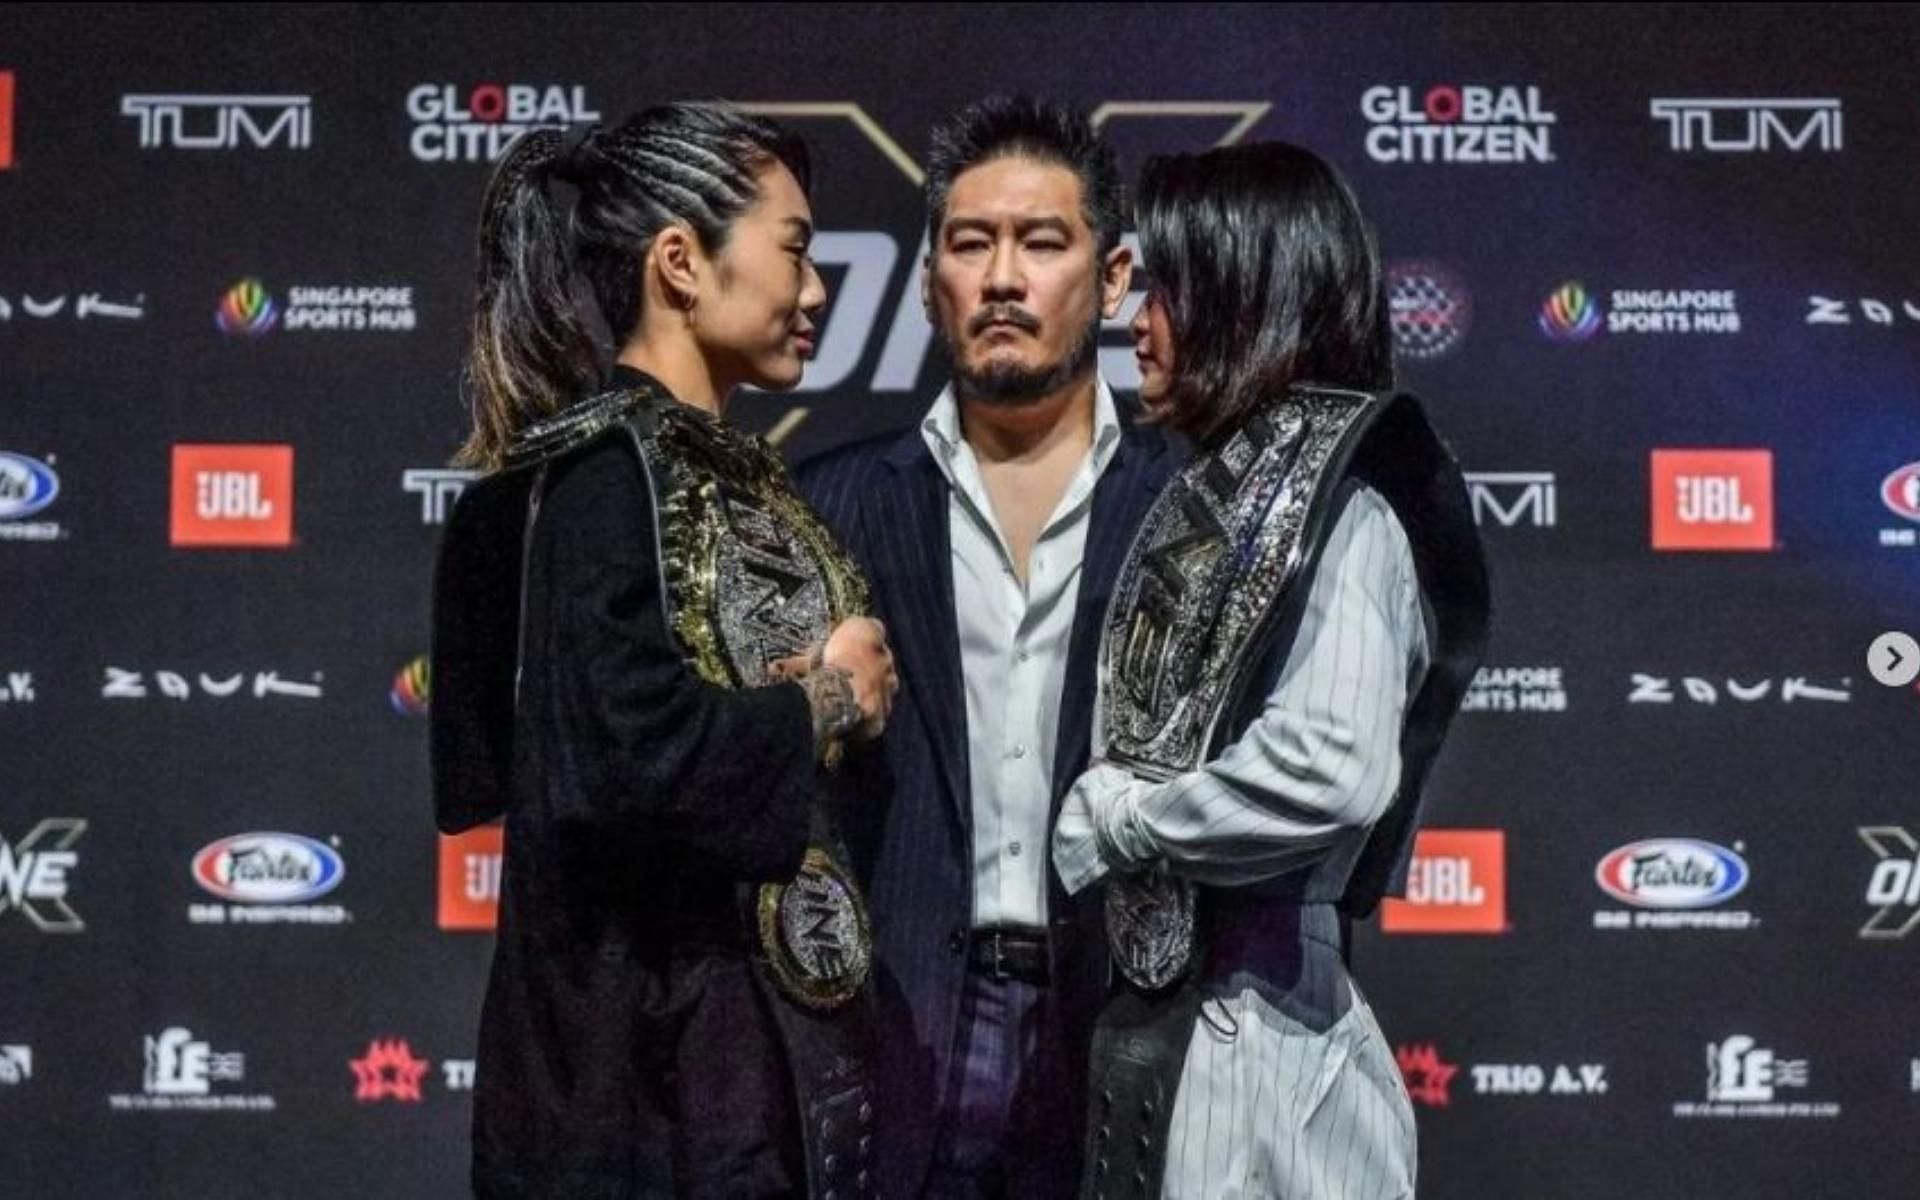 Angela Lee (left) will defend her title against Stamp Fairtex (right) in the main event of ONE X. (Image courtesy: @angelaleemma on Instagram)